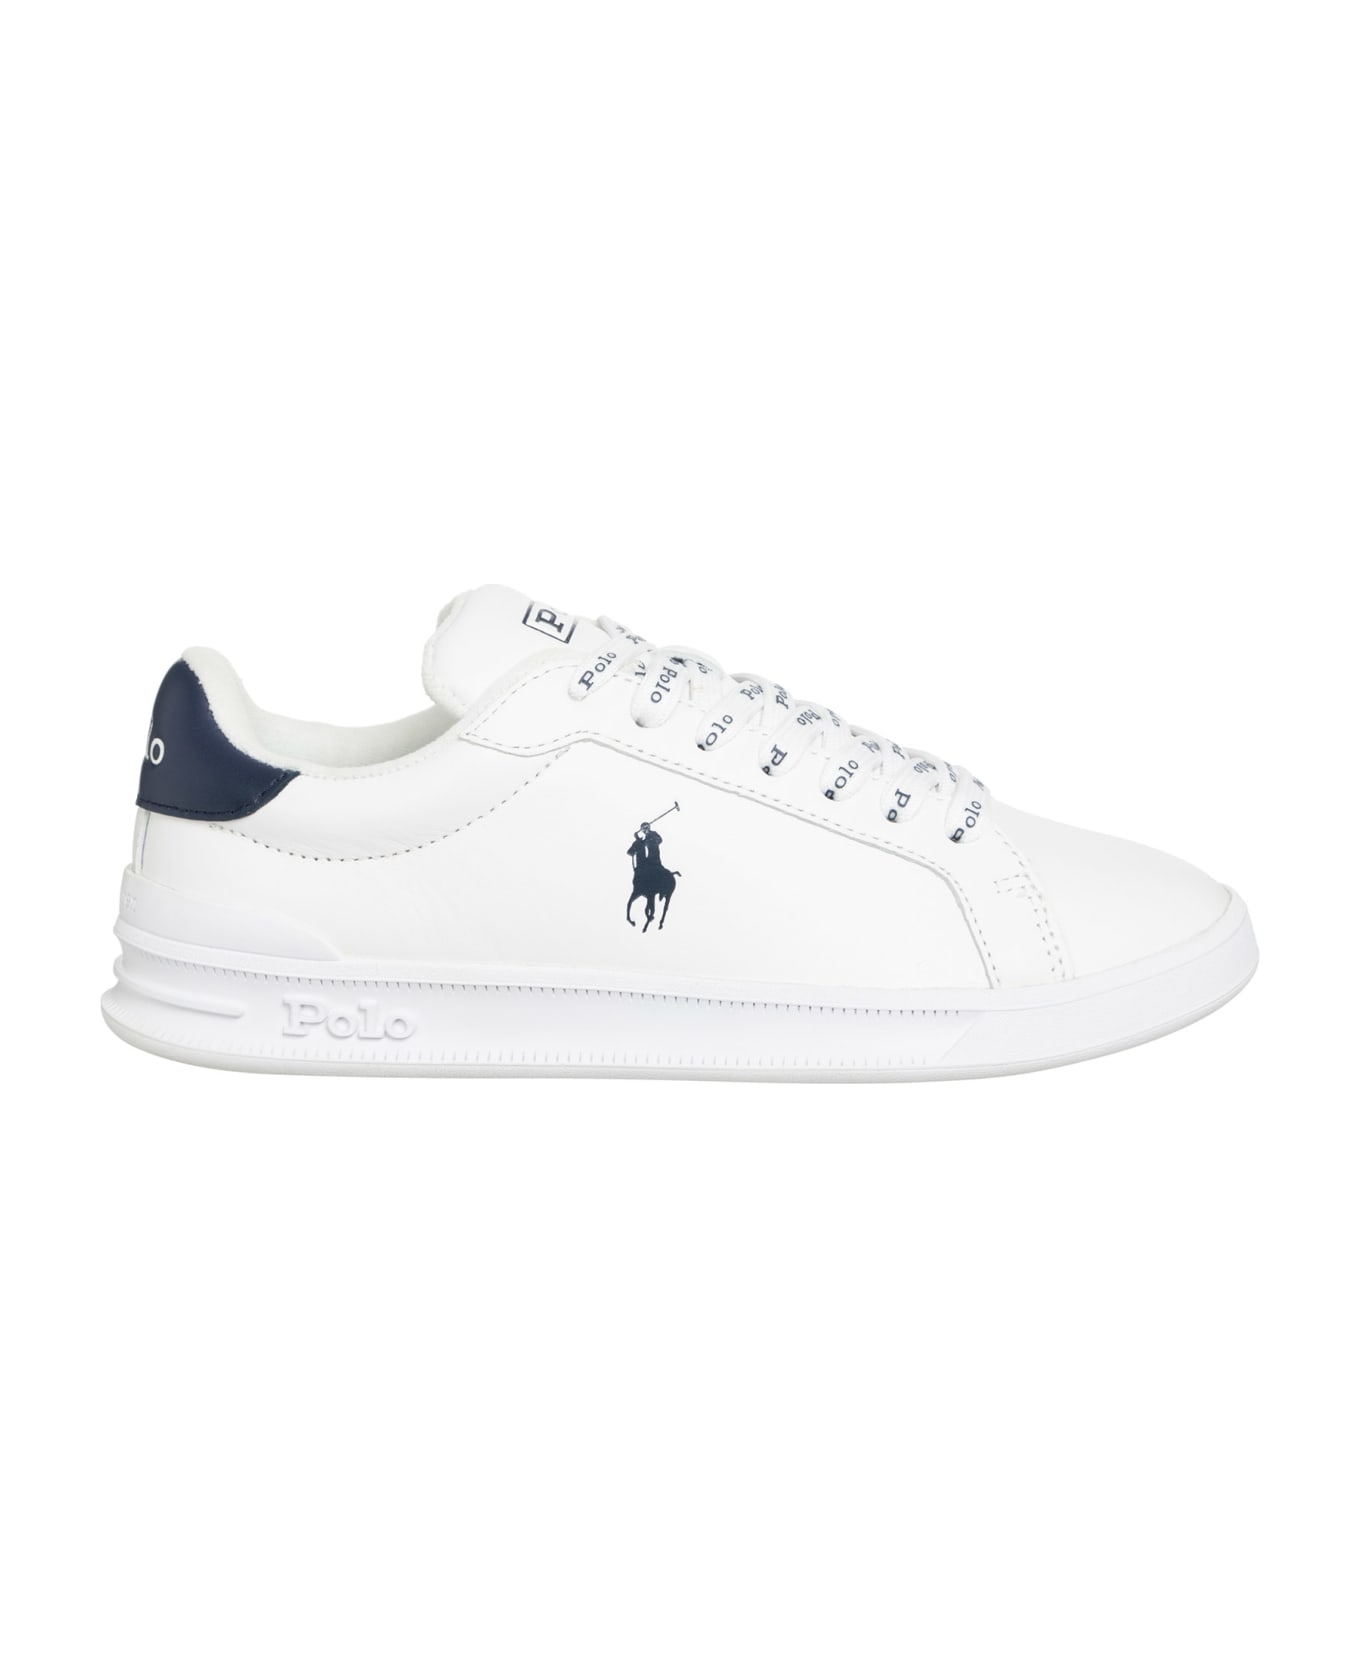 Polo Ralph Lauren Heritage Court Ii Leather Sneakers - White/blue